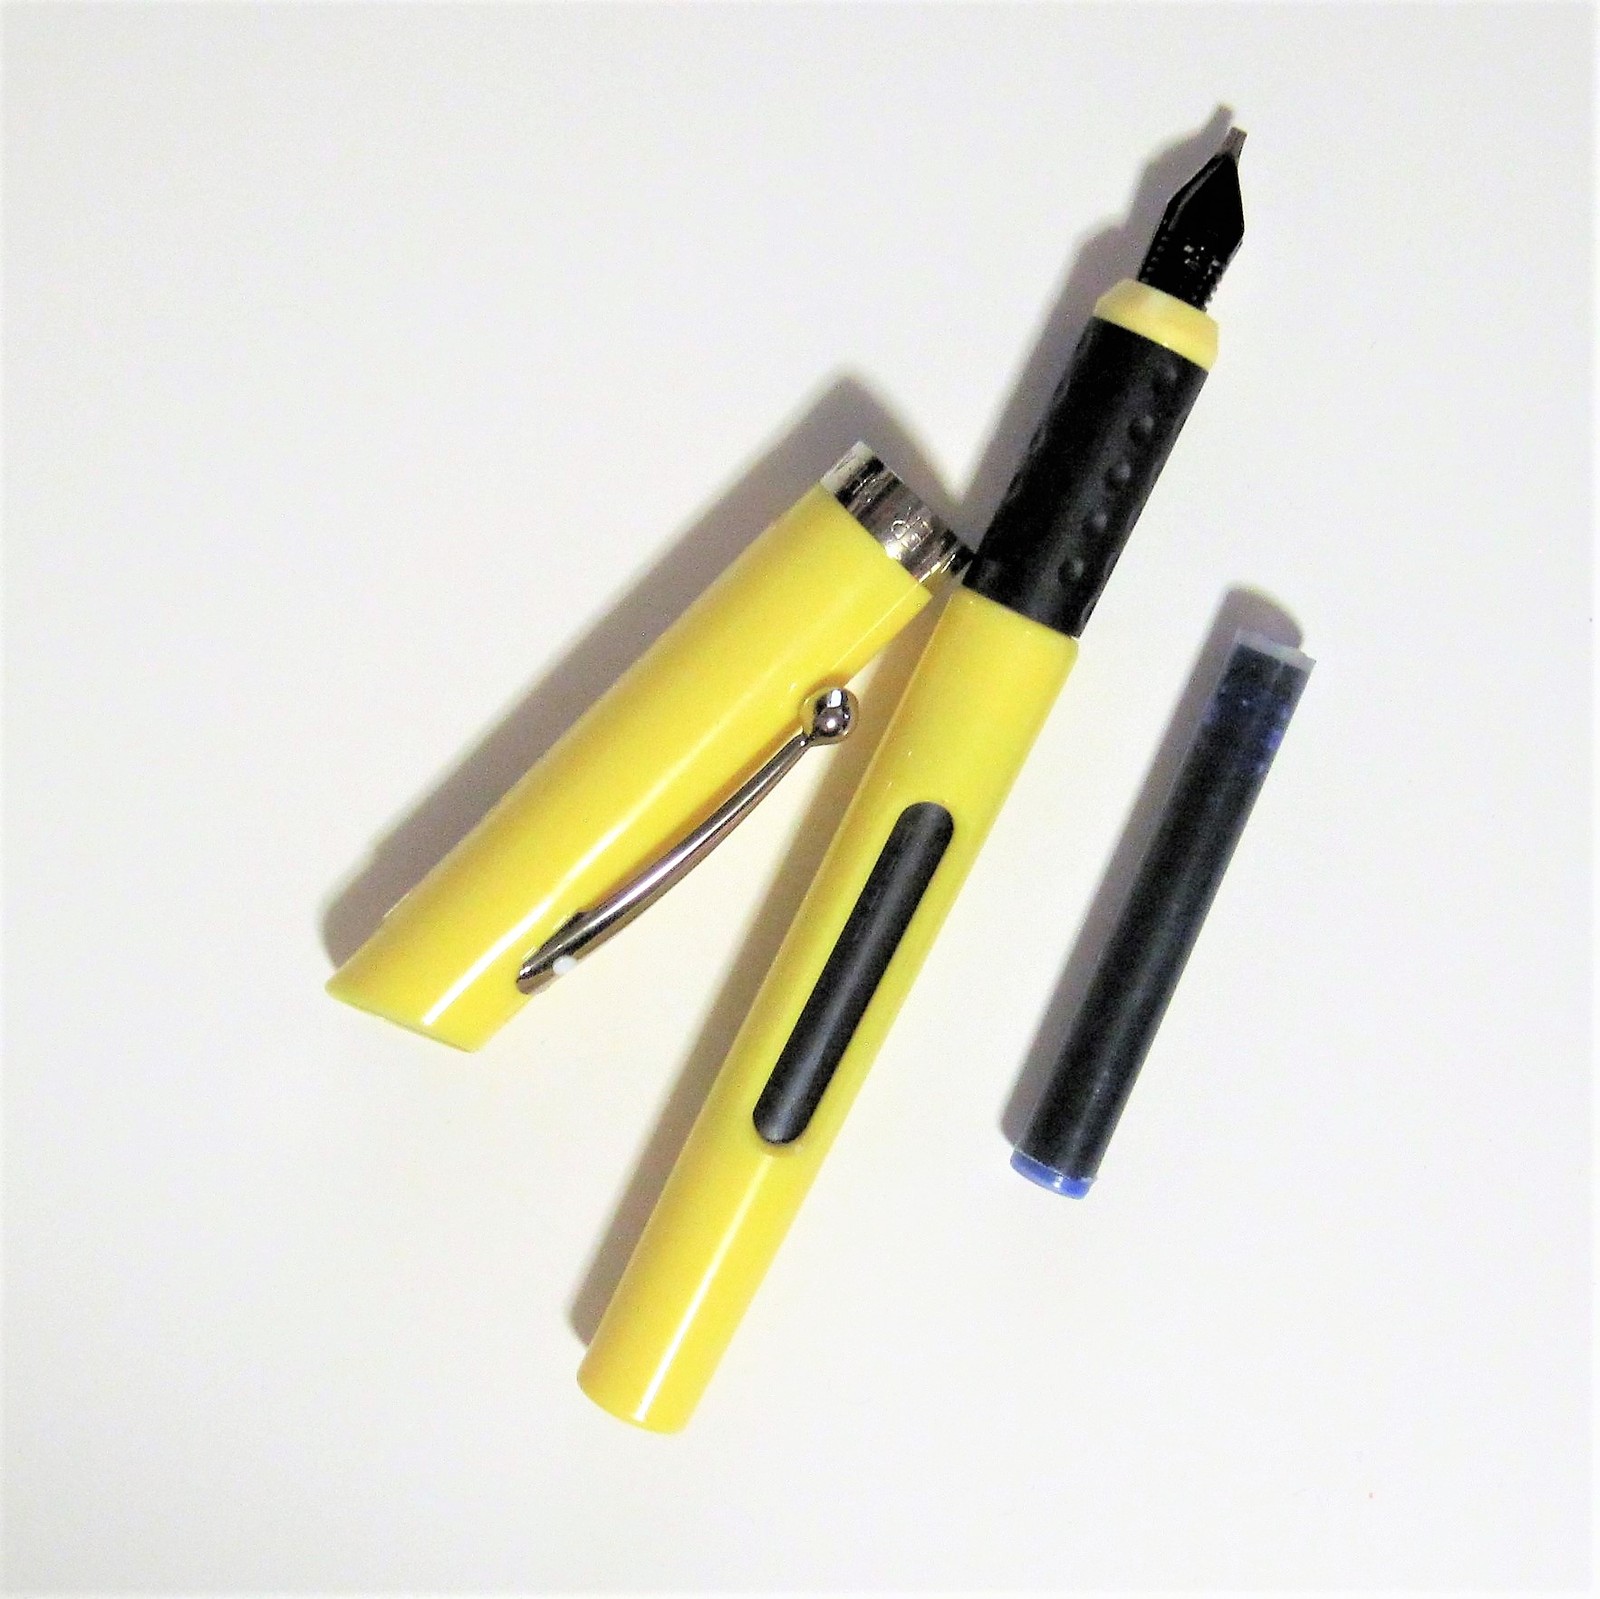 Primary image for Lot of 3 Sheaffer Viewpoint Calligraphy Fountain Pen Medium Nib Black Blue Ink 